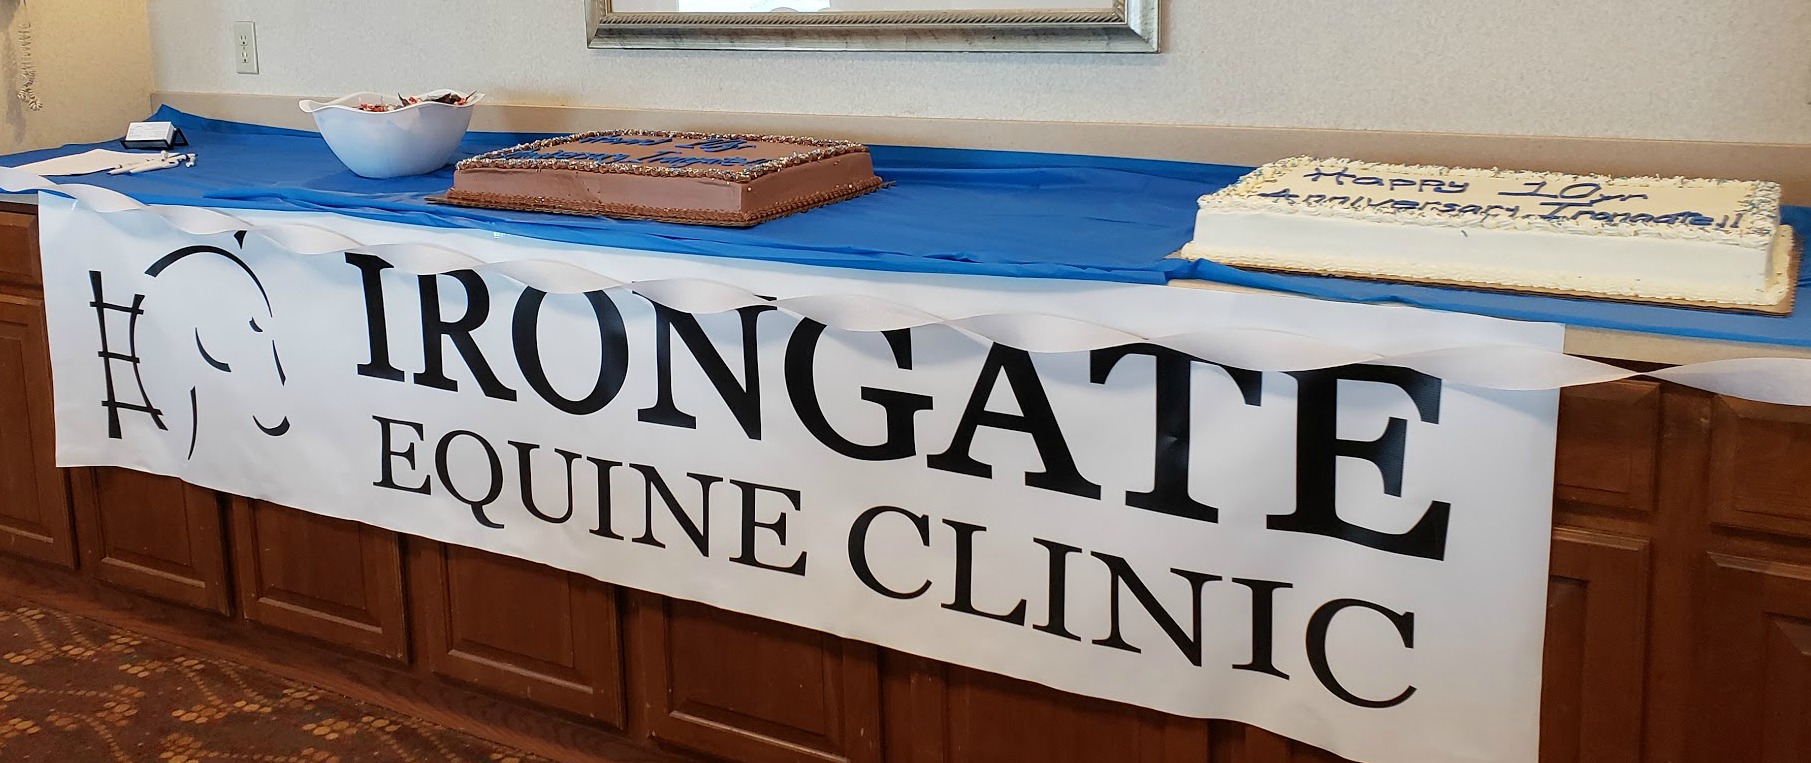 Irongate Equine Clinic